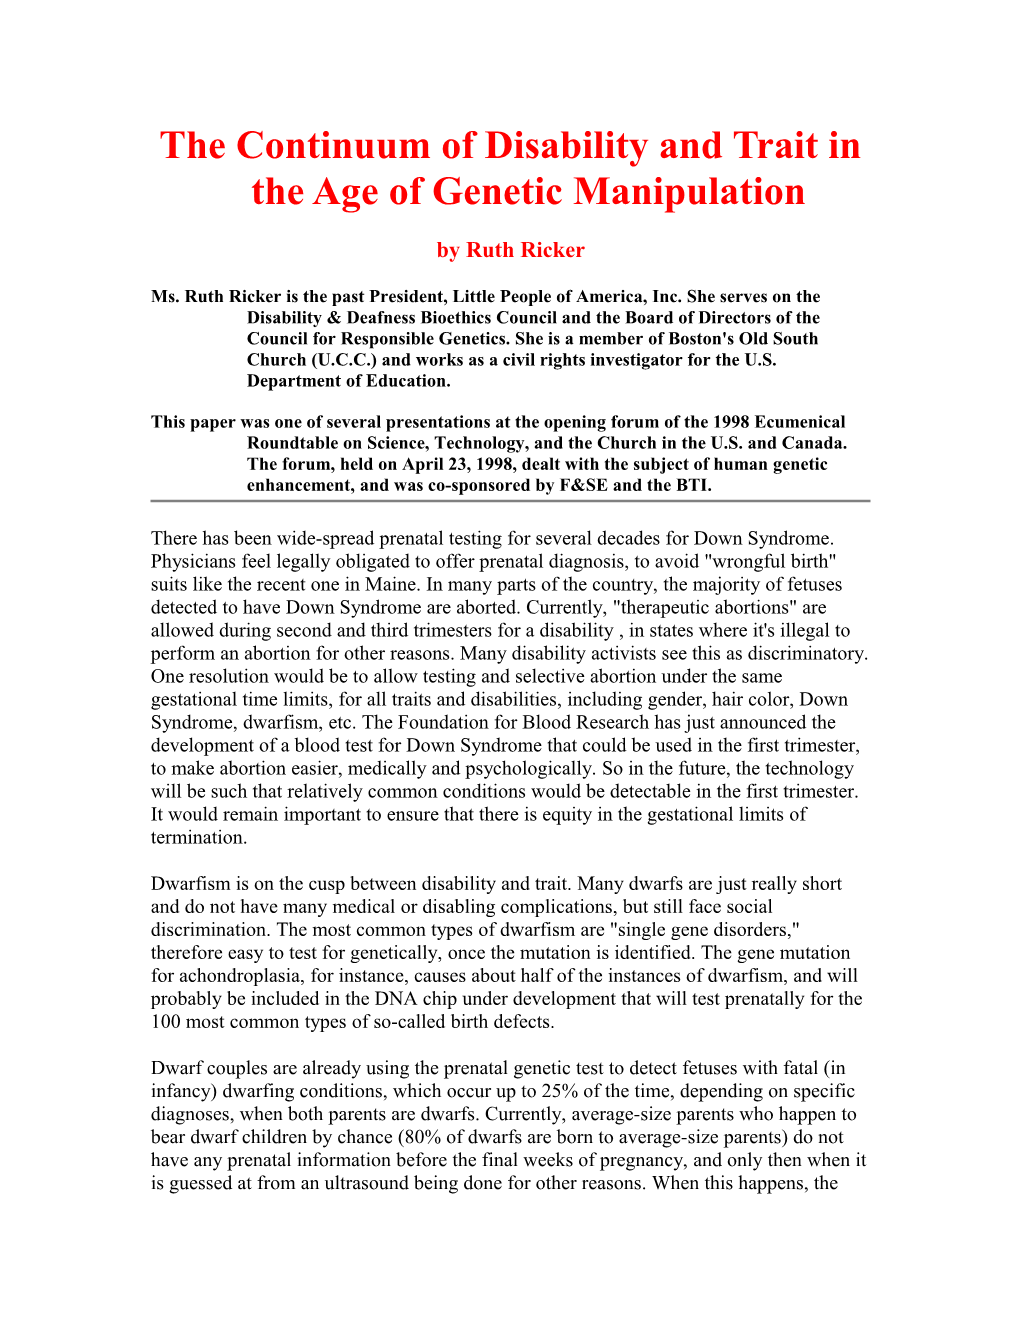 The Continuum of Disability and Trait in the Age of Genetic Manipulation